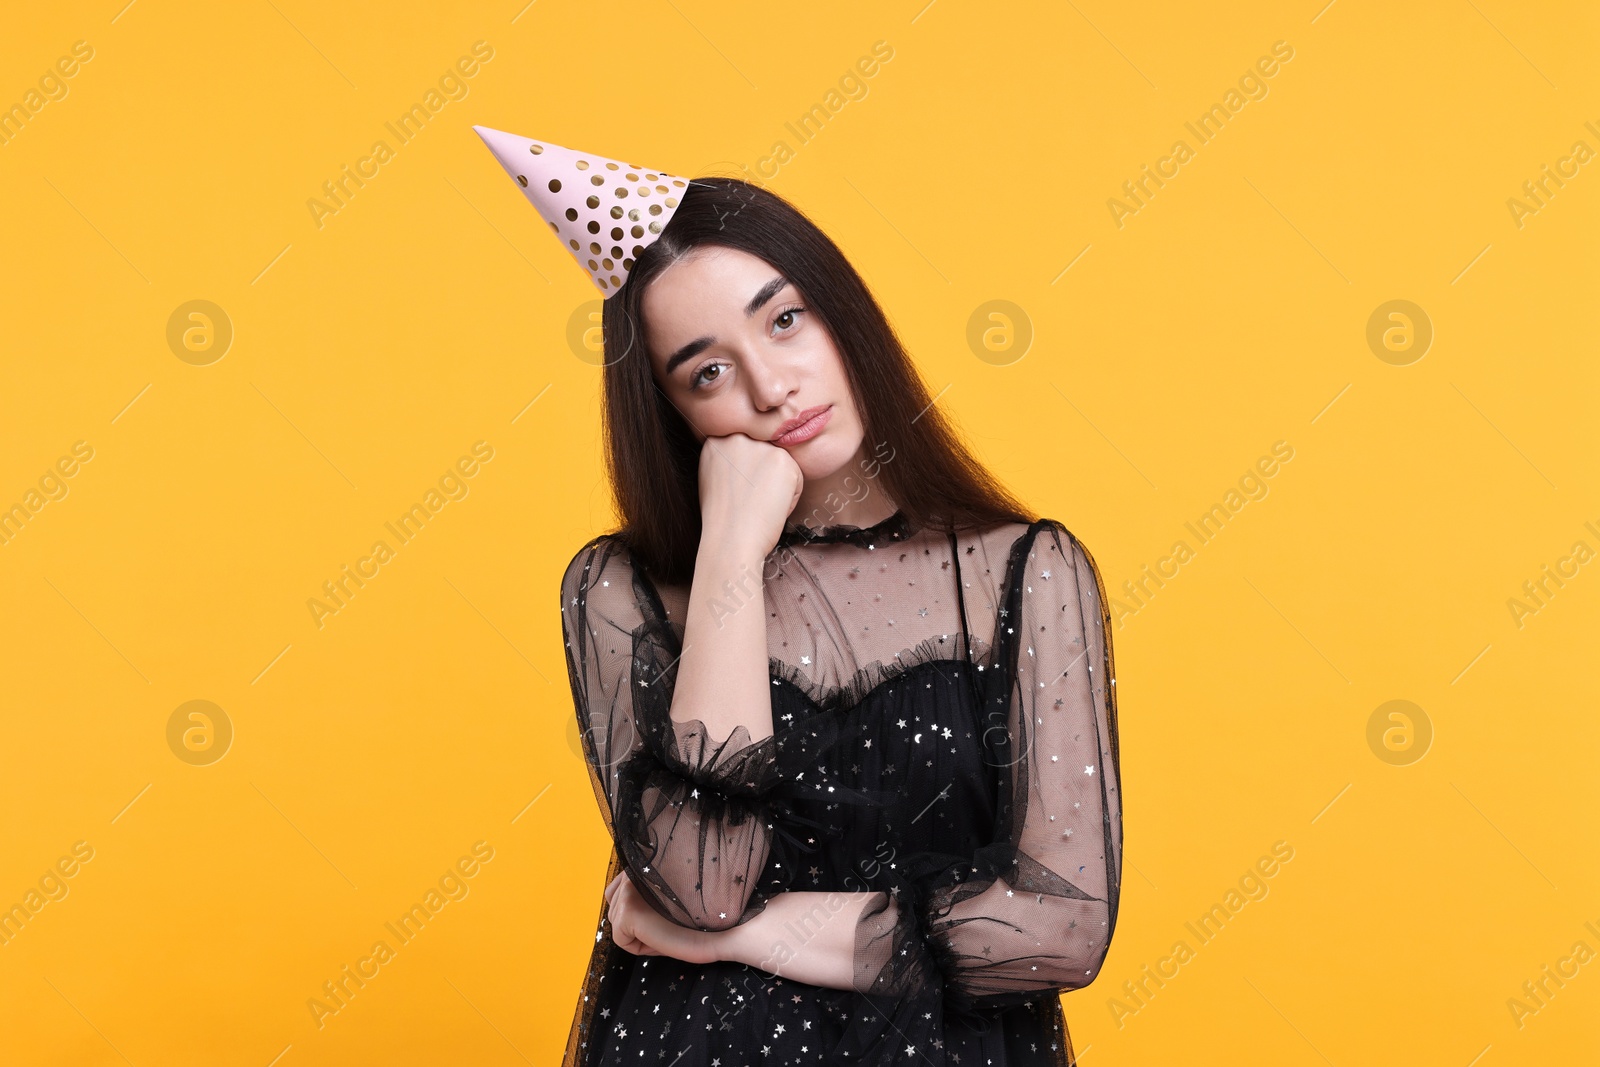 Photo of Sad woman in party hat on orange background